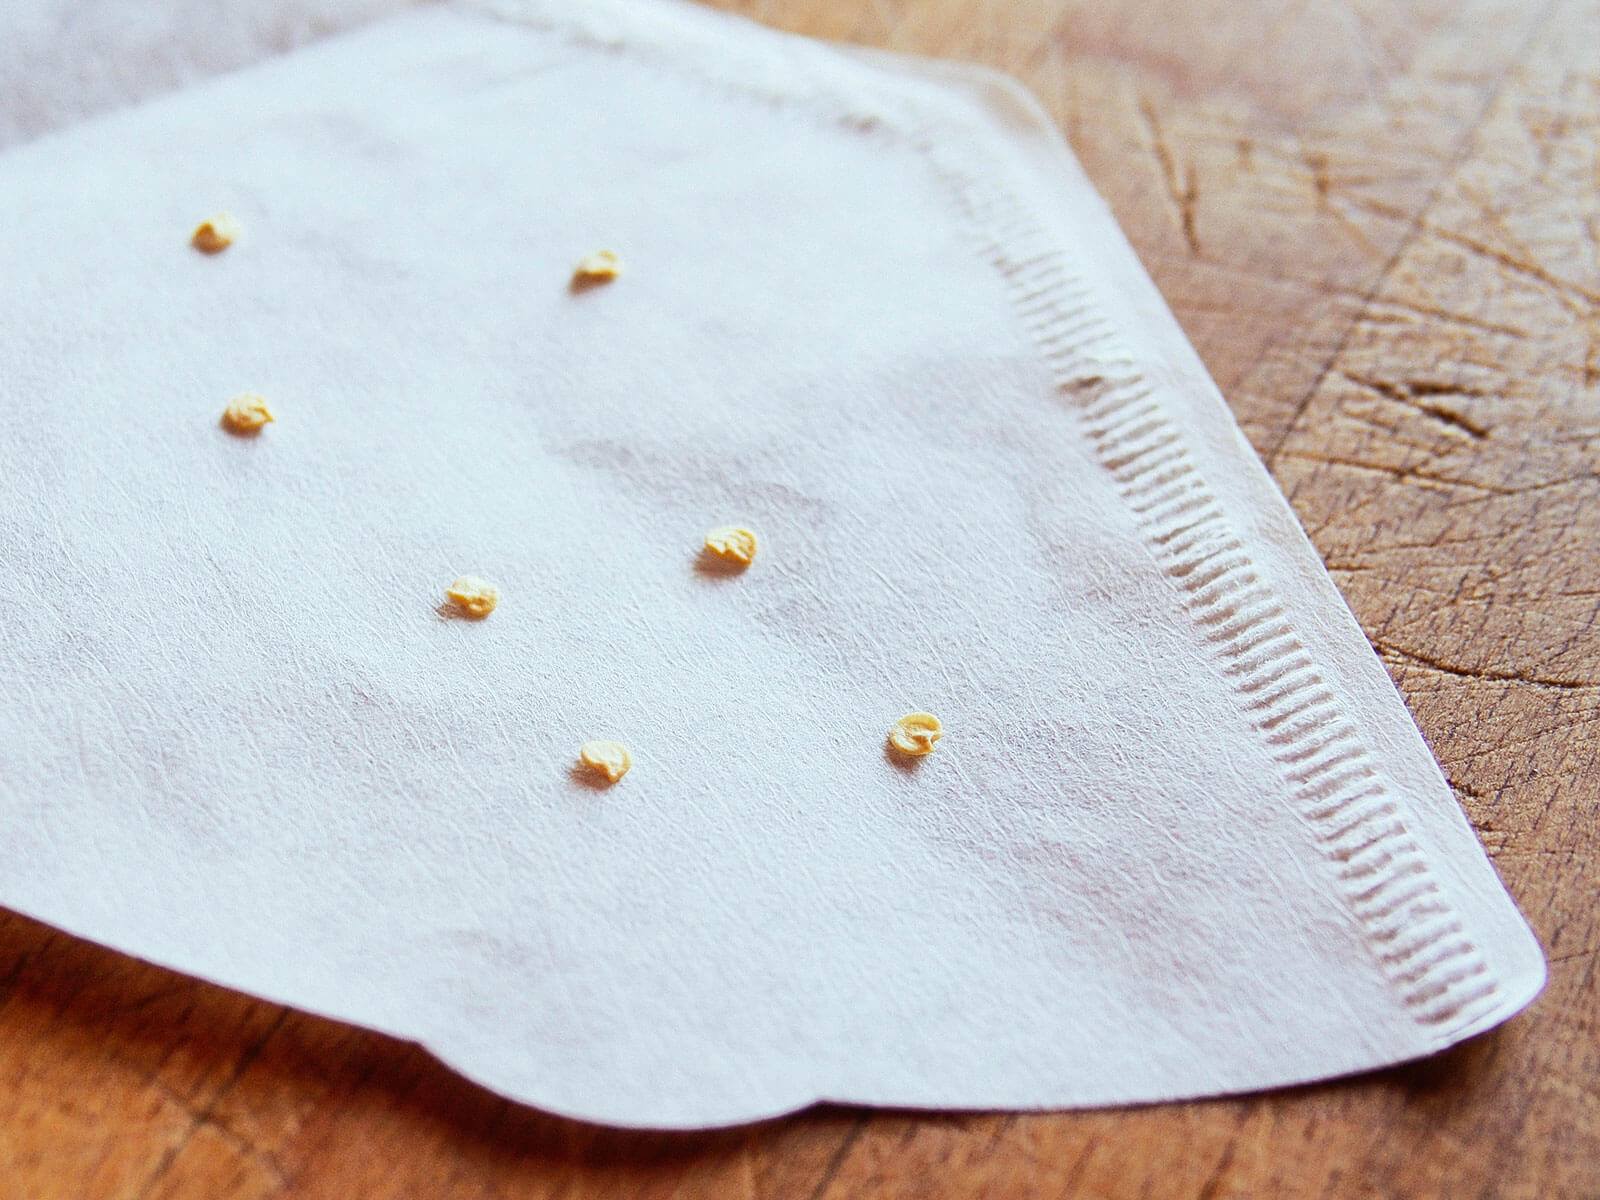 Germinating tomato seeds in a coffee filter